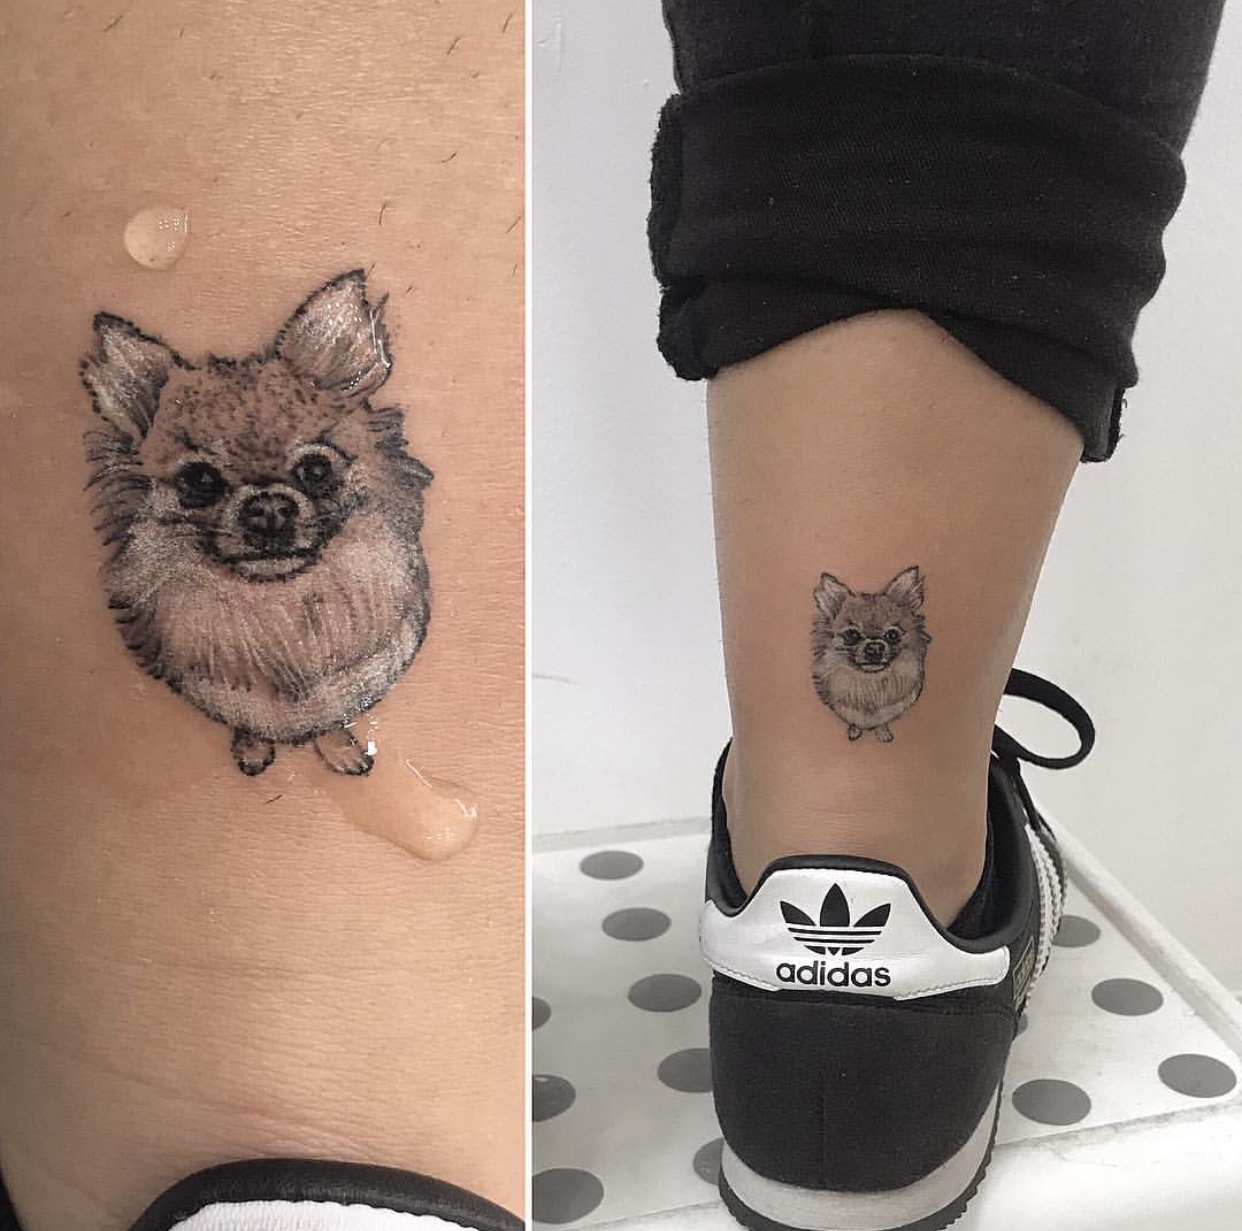 Pomeranian dog tattoo on the back of the ankle